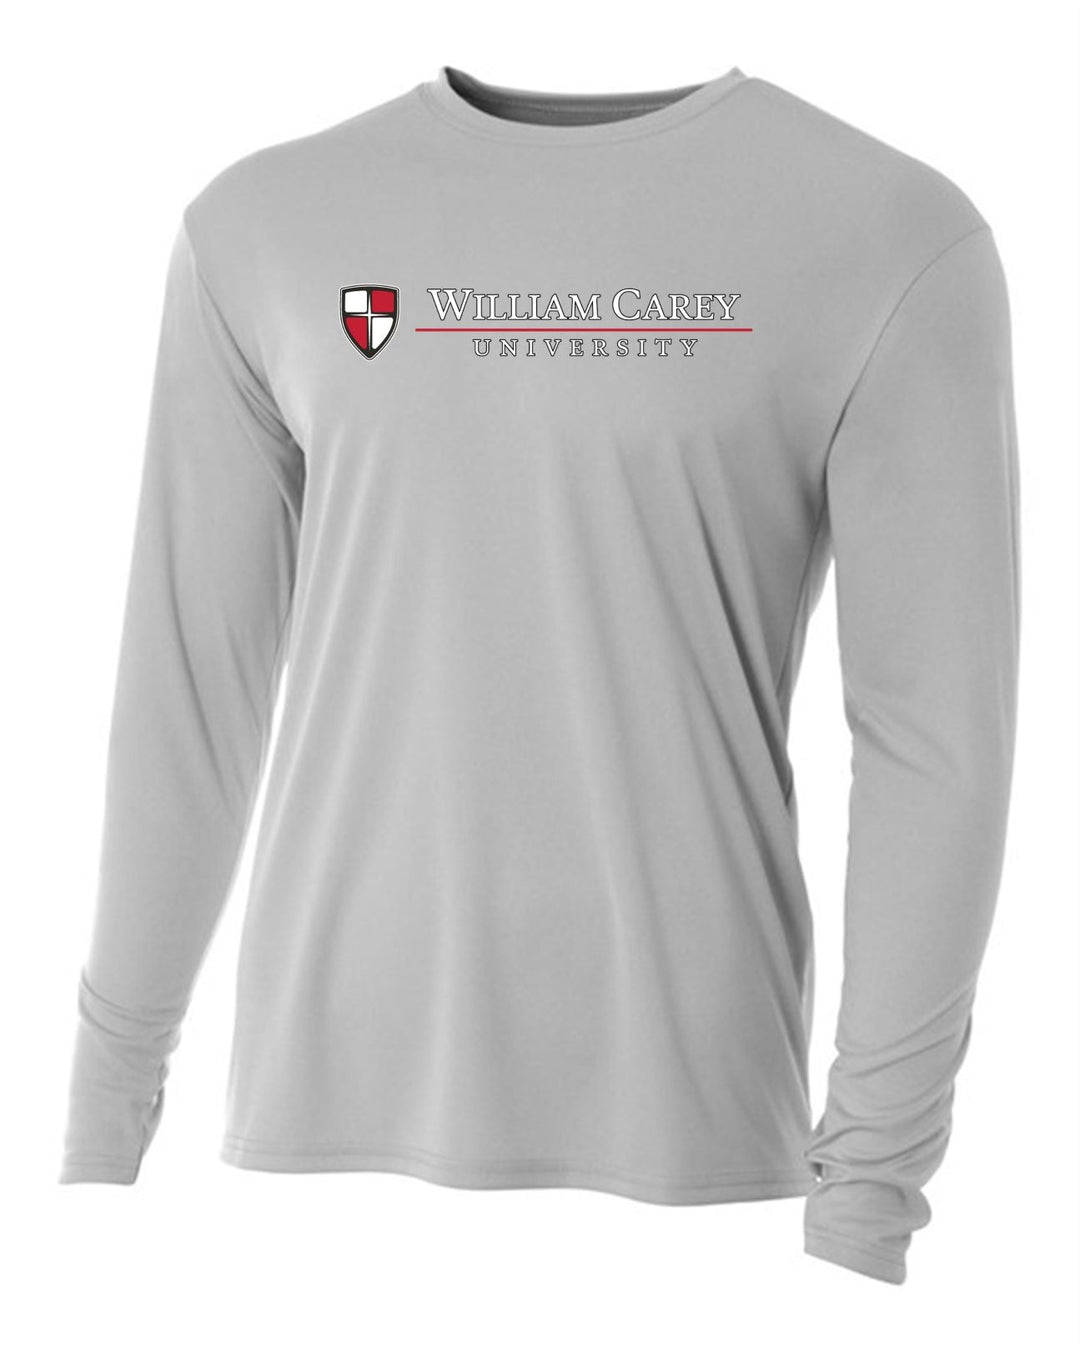 WCU College Of Osteopathic Medicine Youth Long-Sleeve Performance Shirt WCU OM Silver Grey Youth Small - Third Coast Soccer